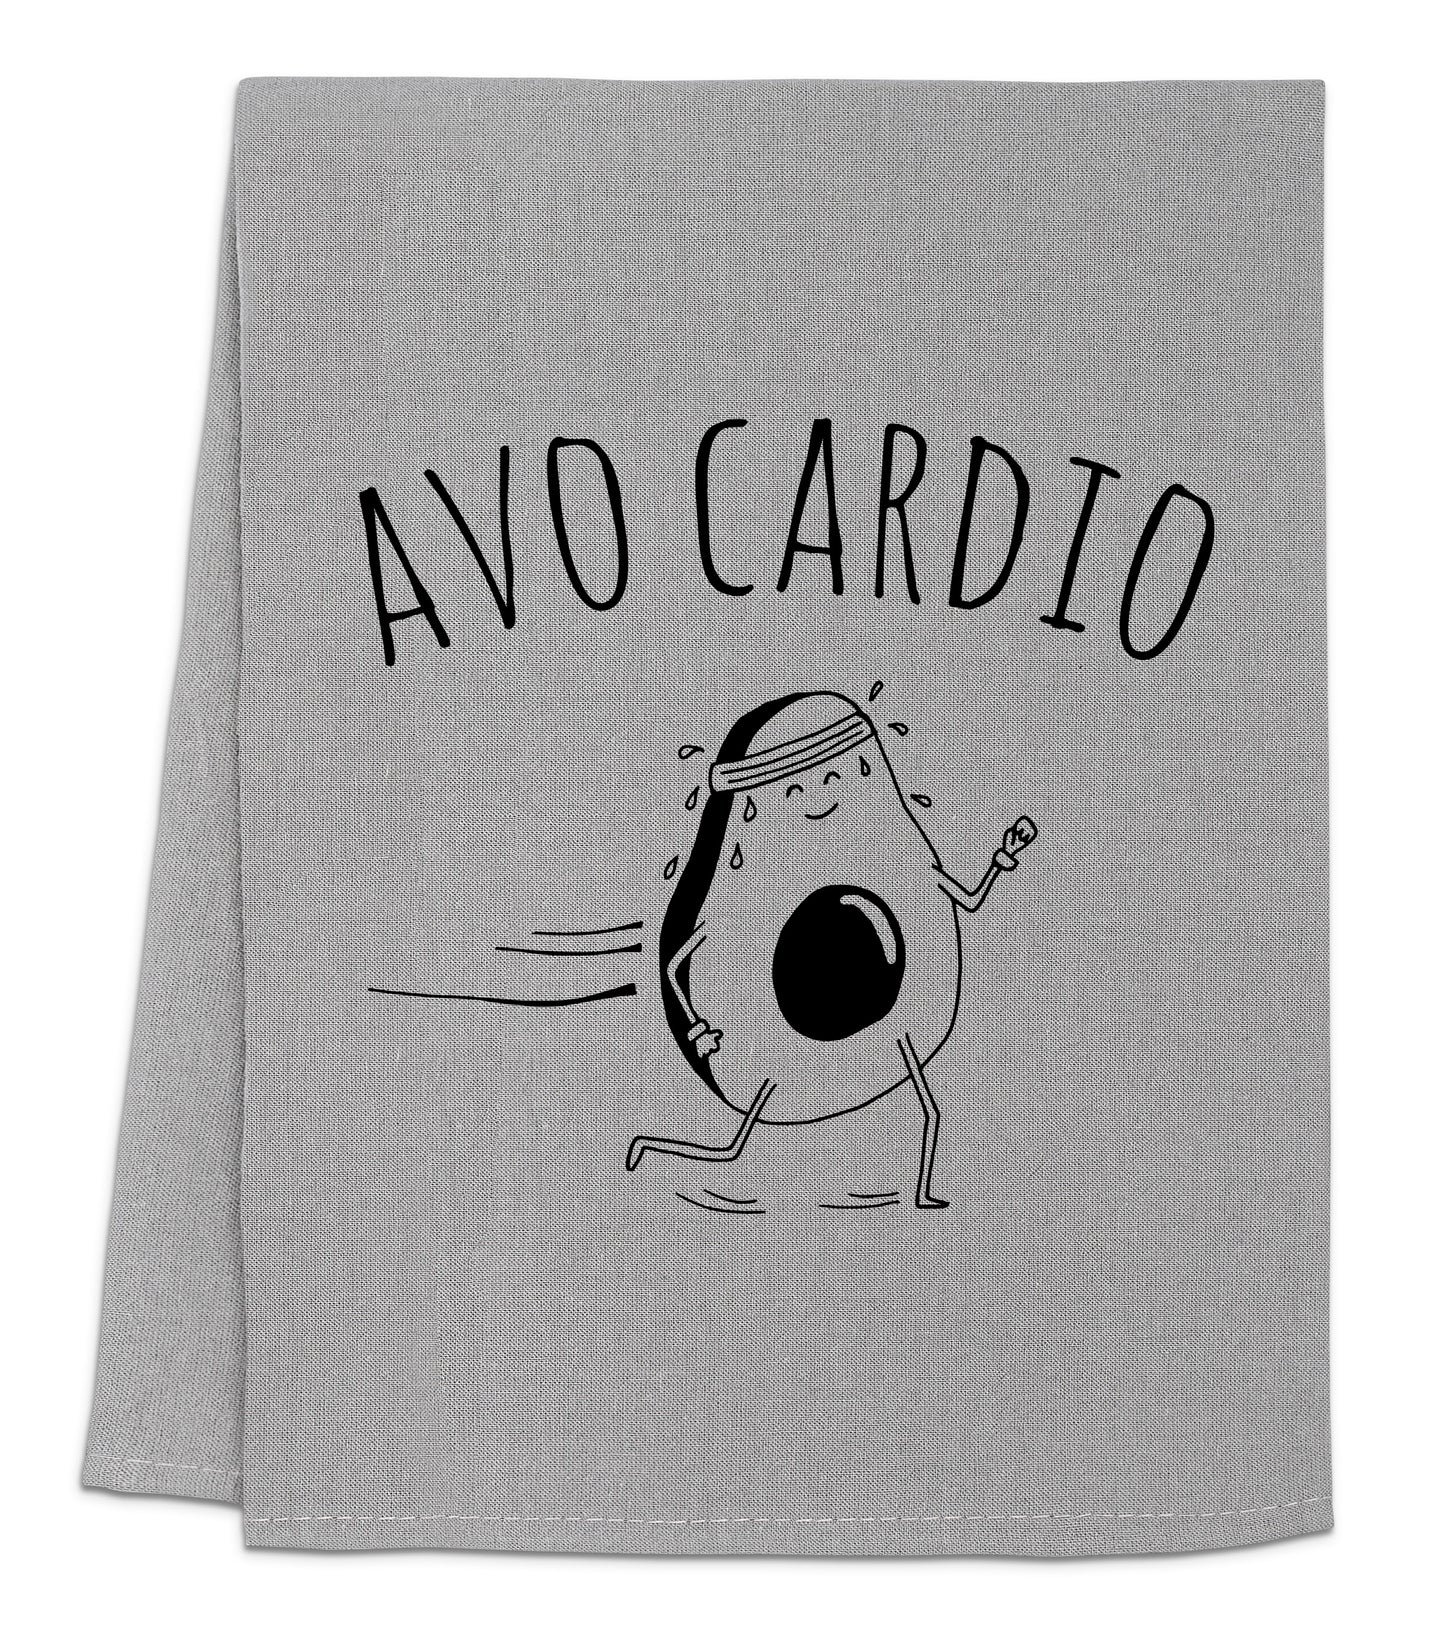 a towel with an image of a cartoon character running